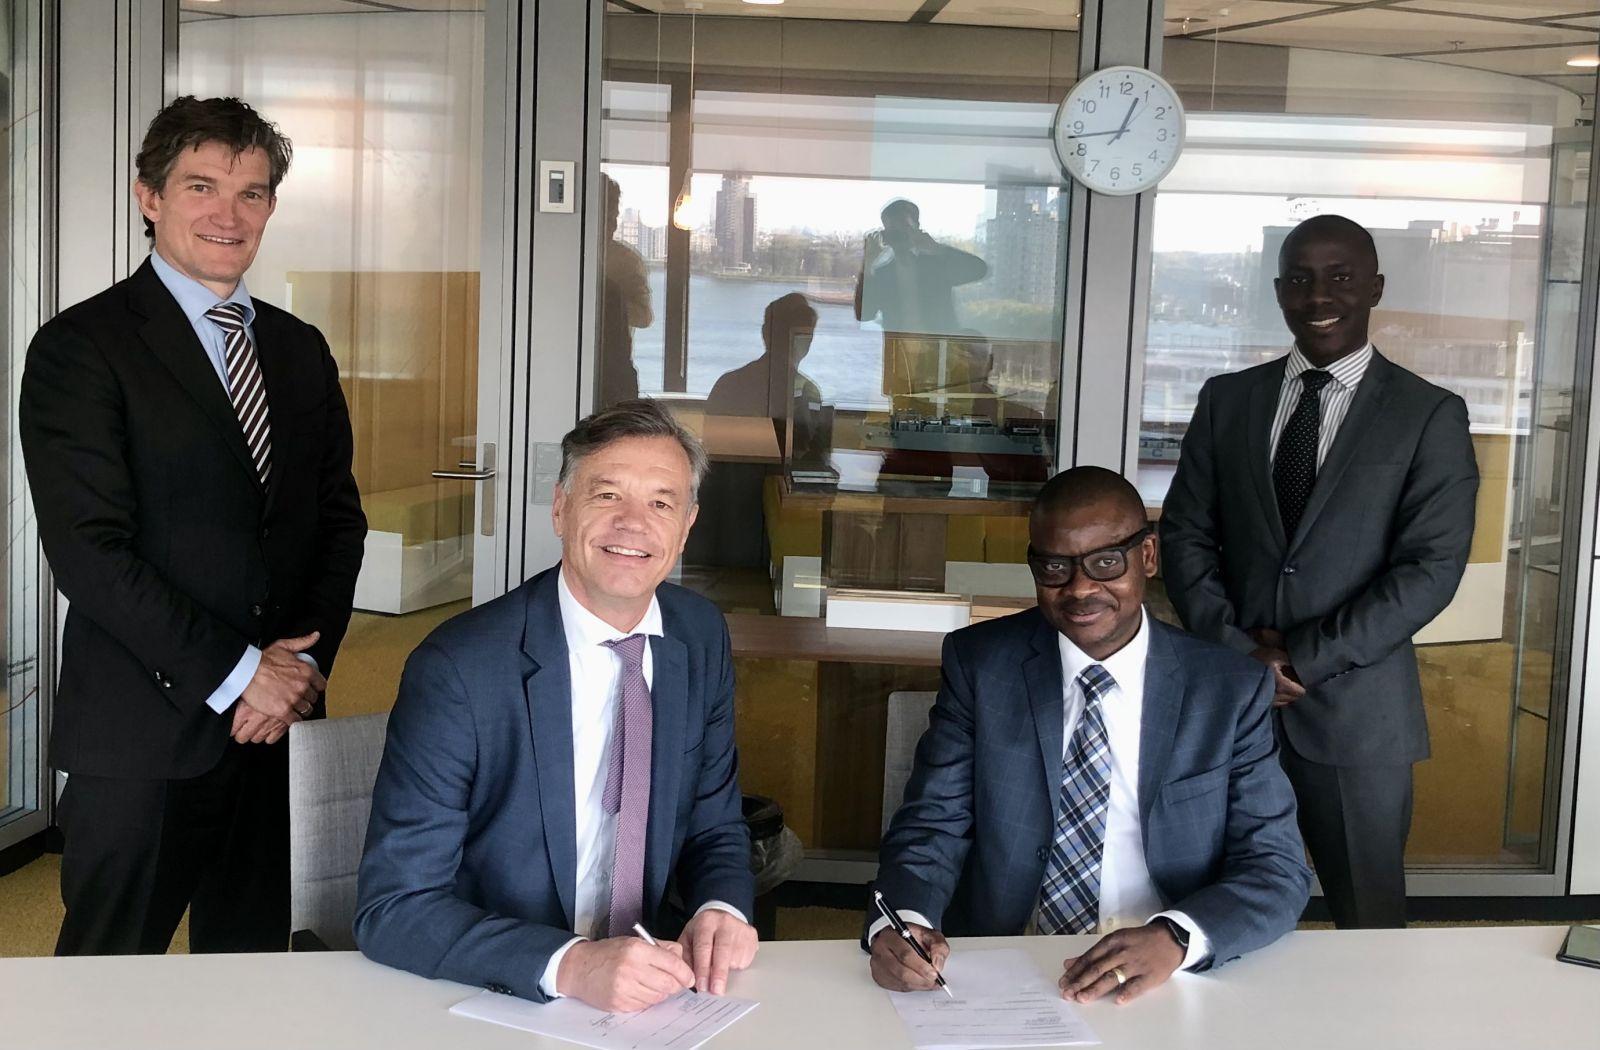 Namibian Ports Authority Signs MoU With The Port Of Rotterdam - Readying Itself To Become The Green Hydrogen Export Hub For Europe And The Rest Of The World